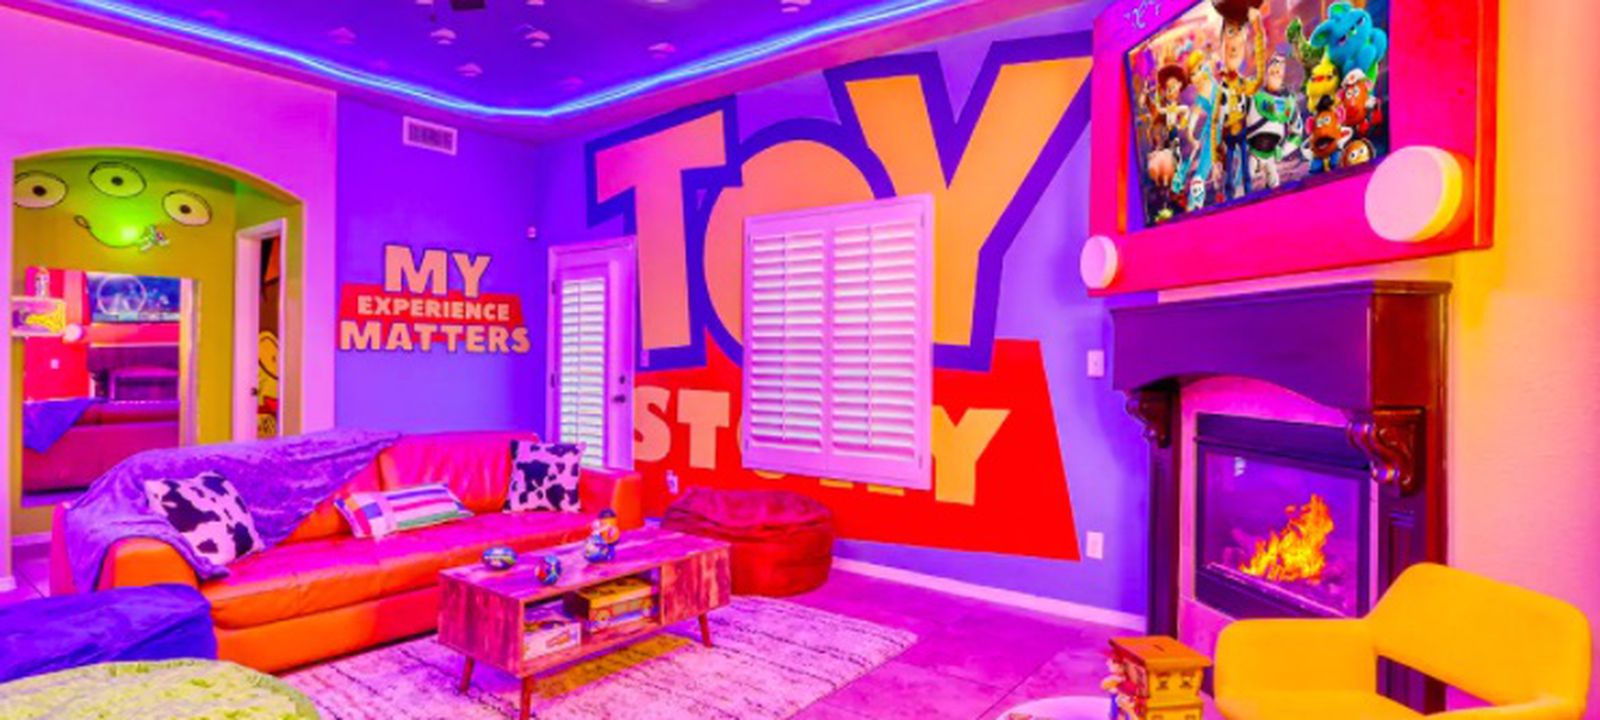 toy story airbnb